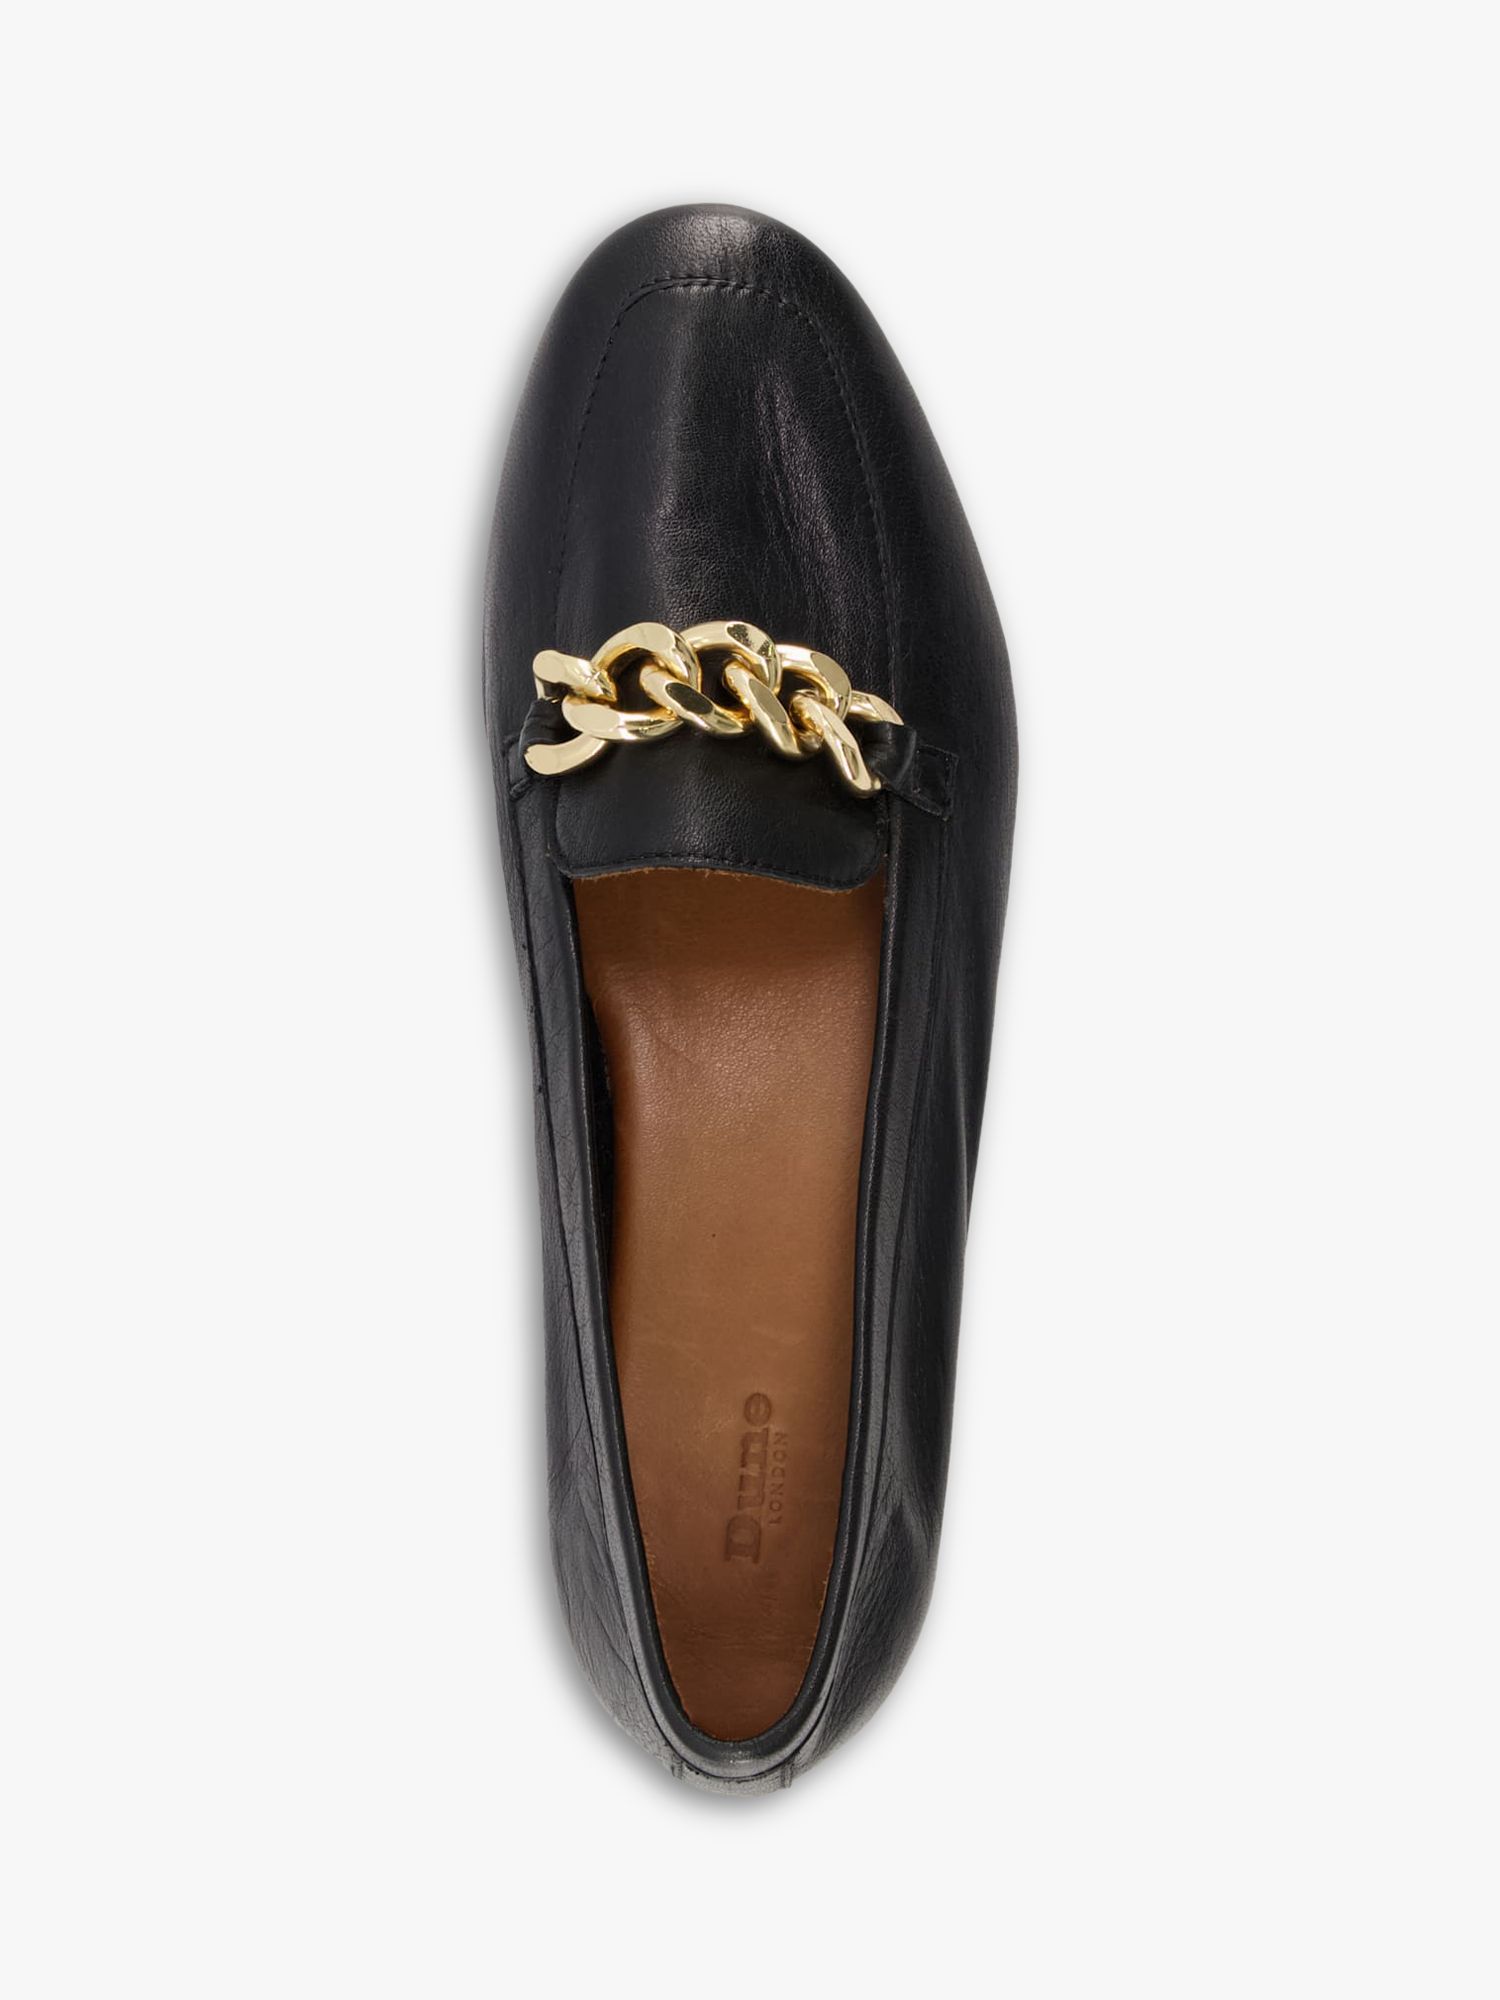 Dune Goldsmith Leather Chain Detail Loafers, Black, 3